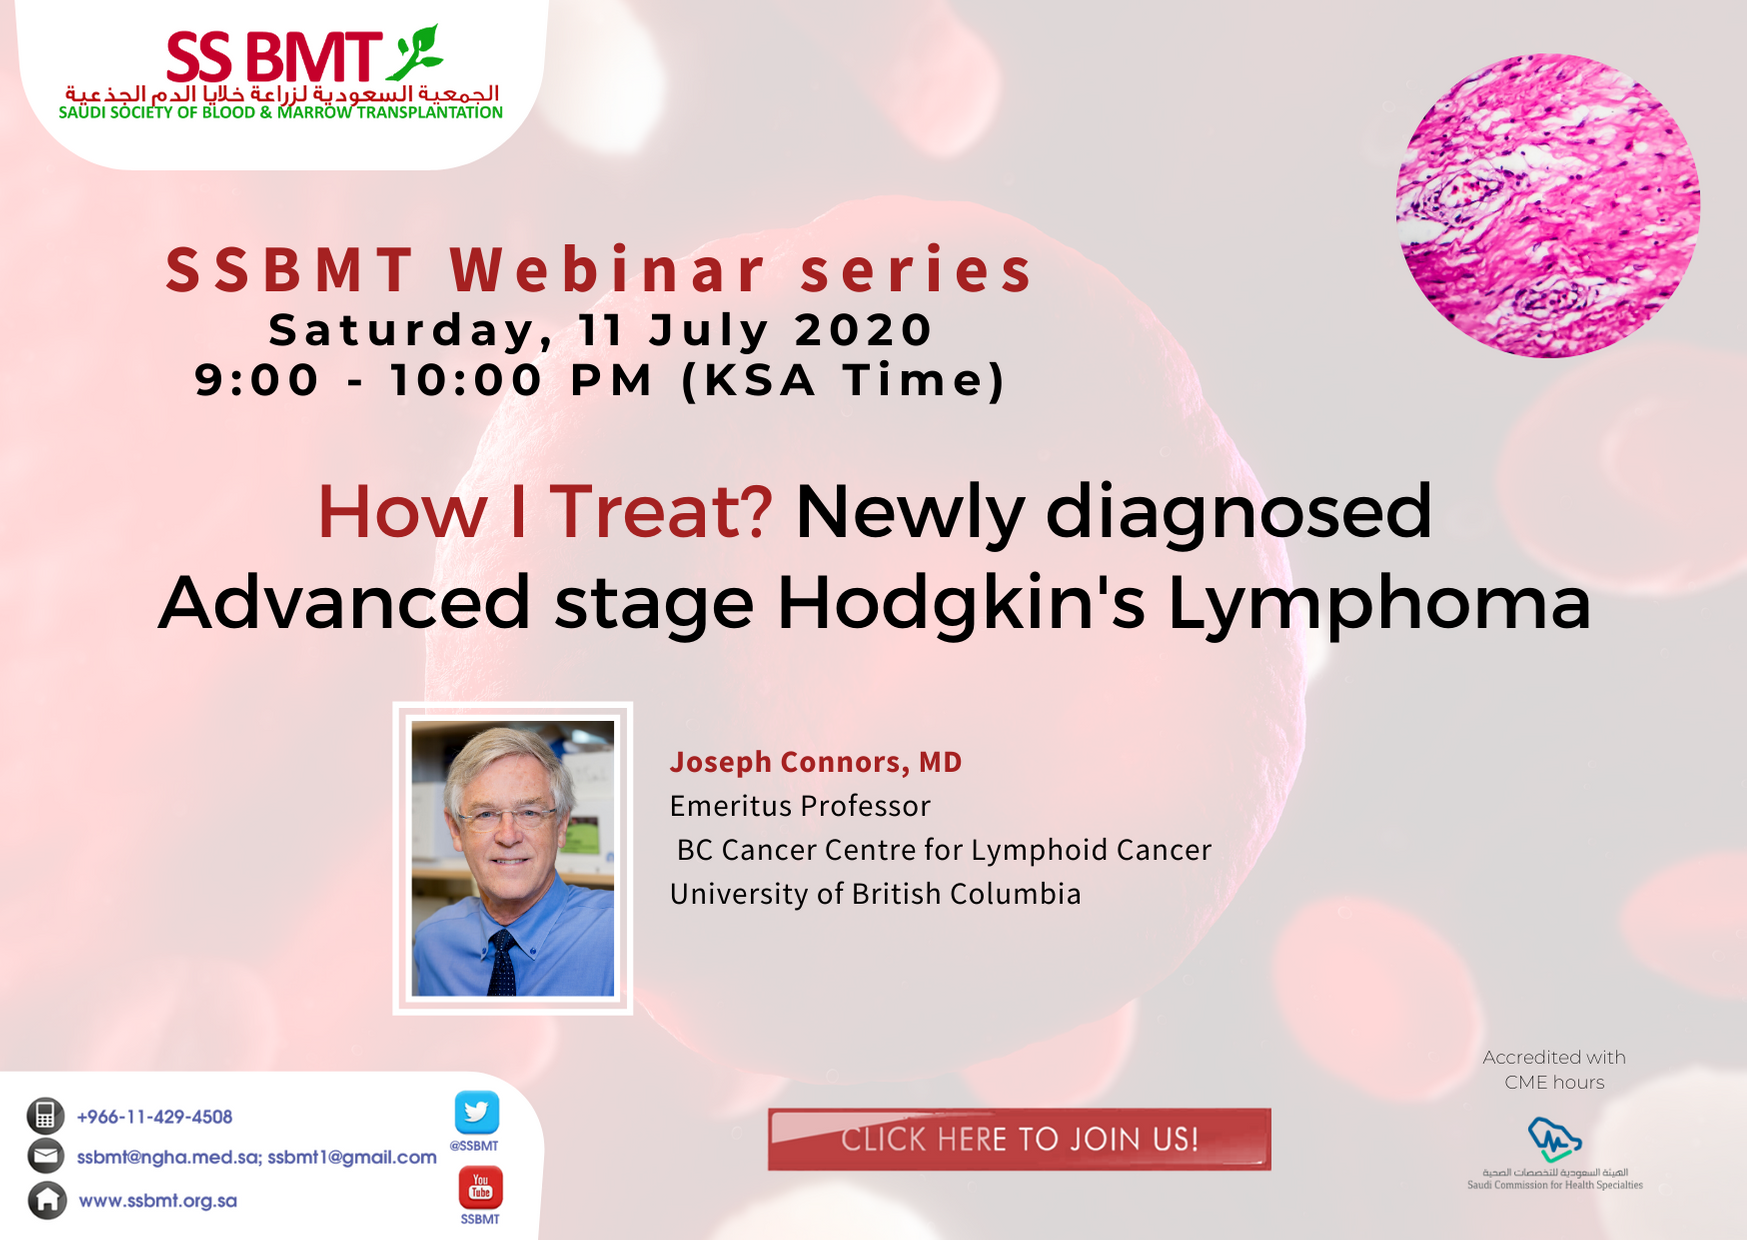 Newly diagnosed Advanced stage Hodgkin’s Lymphoma